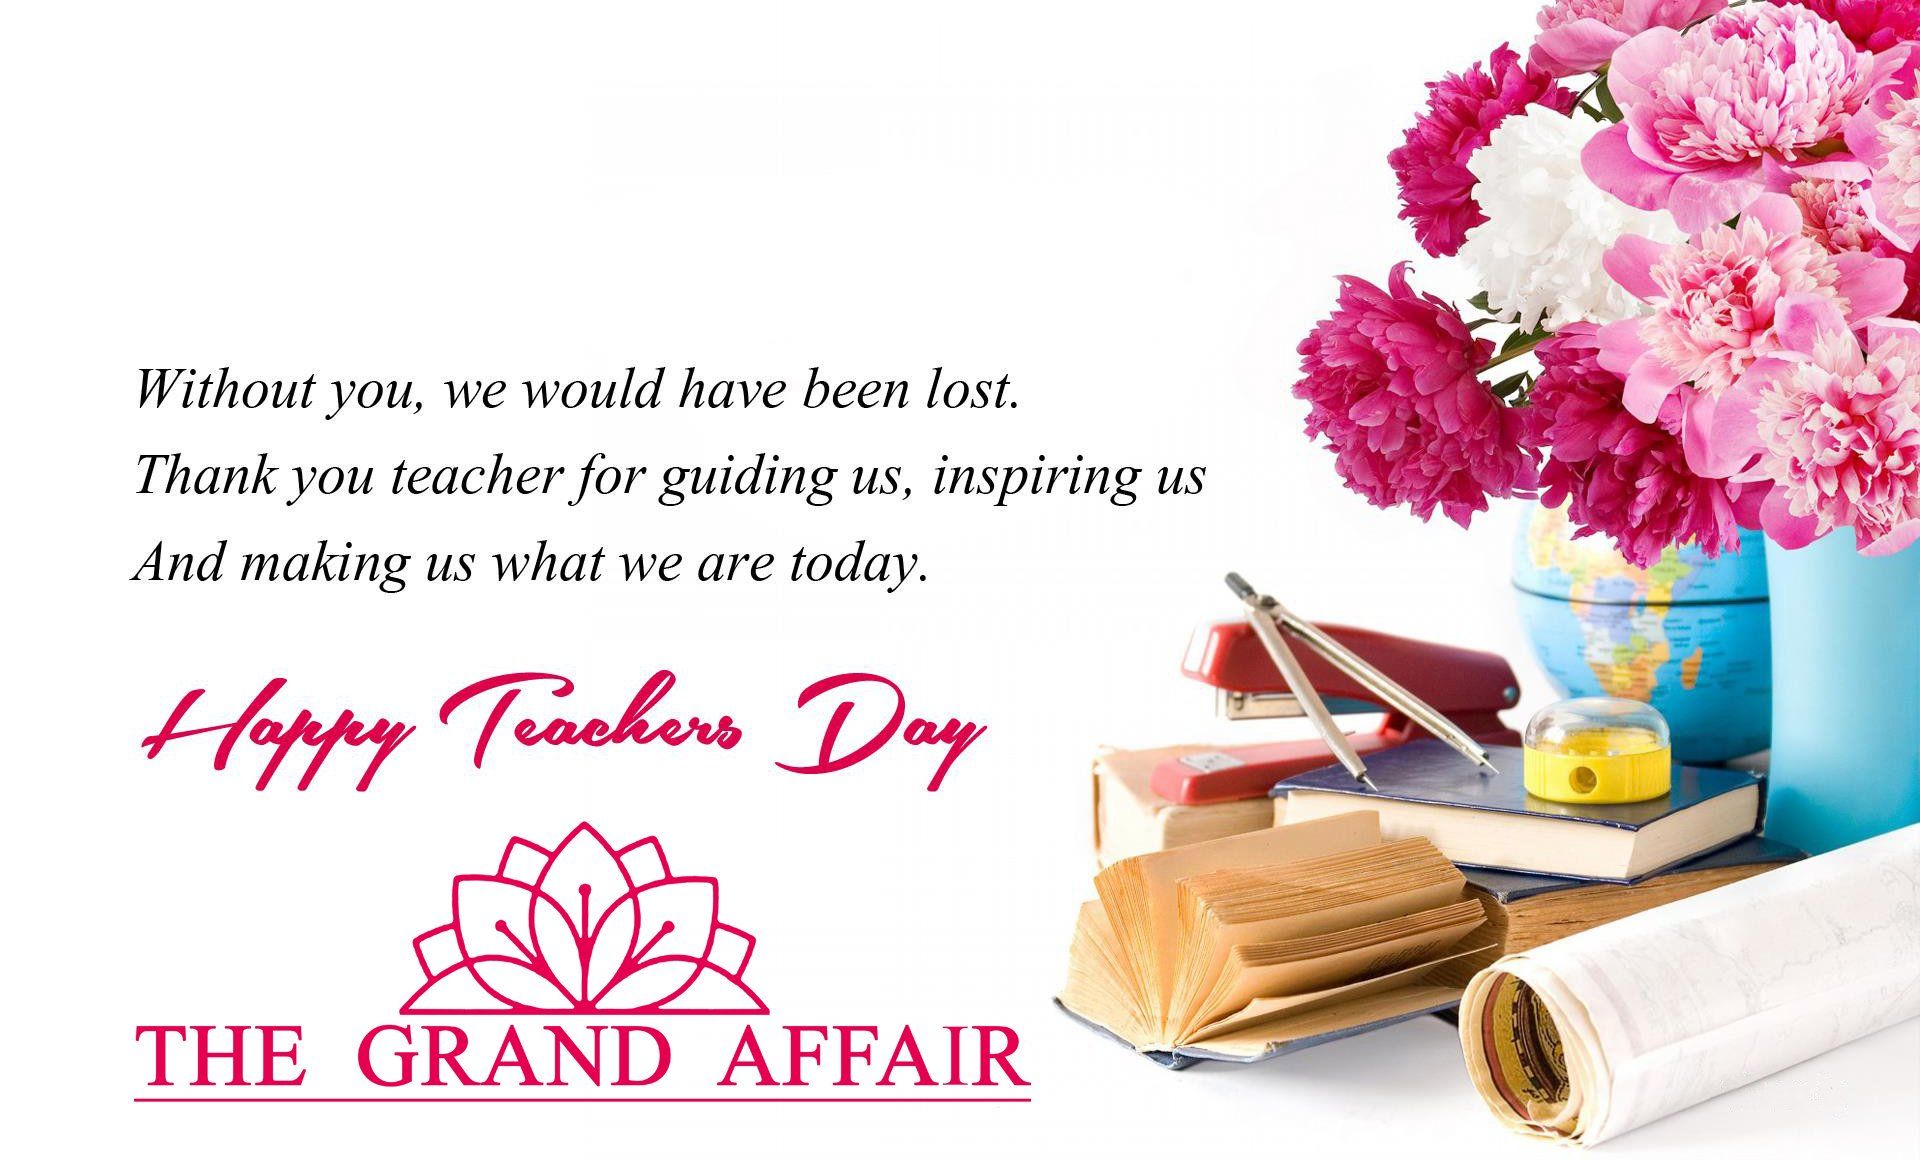 Account Suspended. Teachers day wishes, Happy teachers day, Happy teachers day wishes